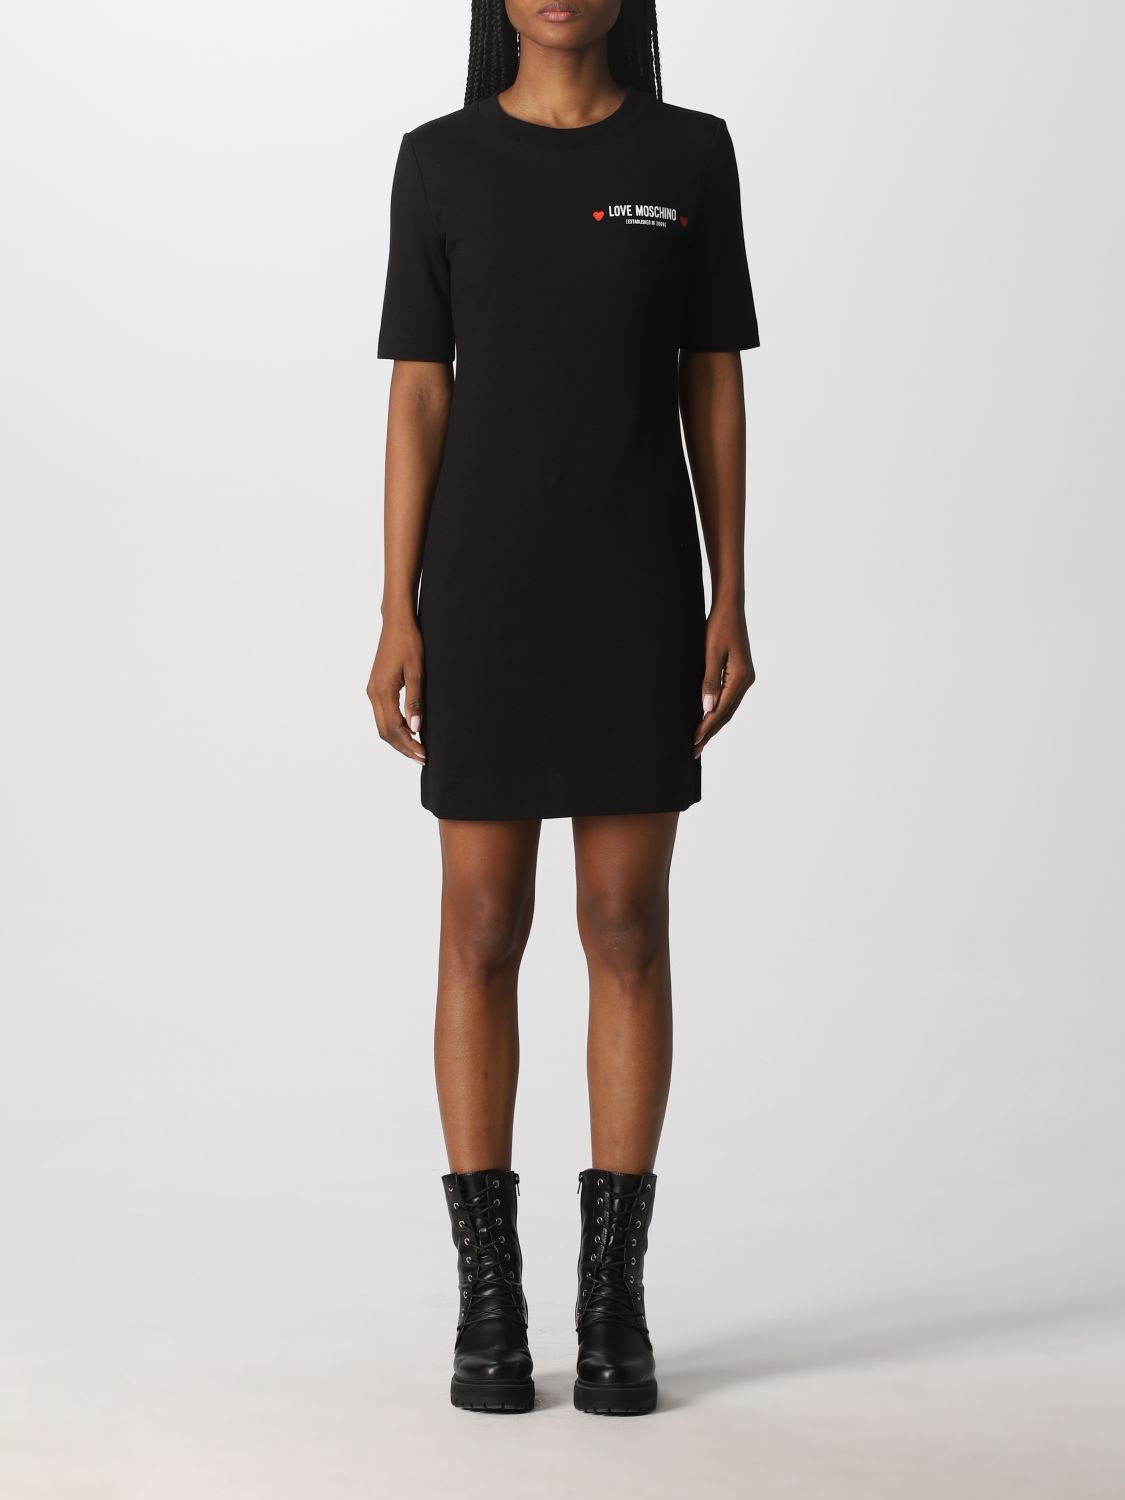 Love Moschino Outlet: dress for woman - Black | Love Moschino dress ...